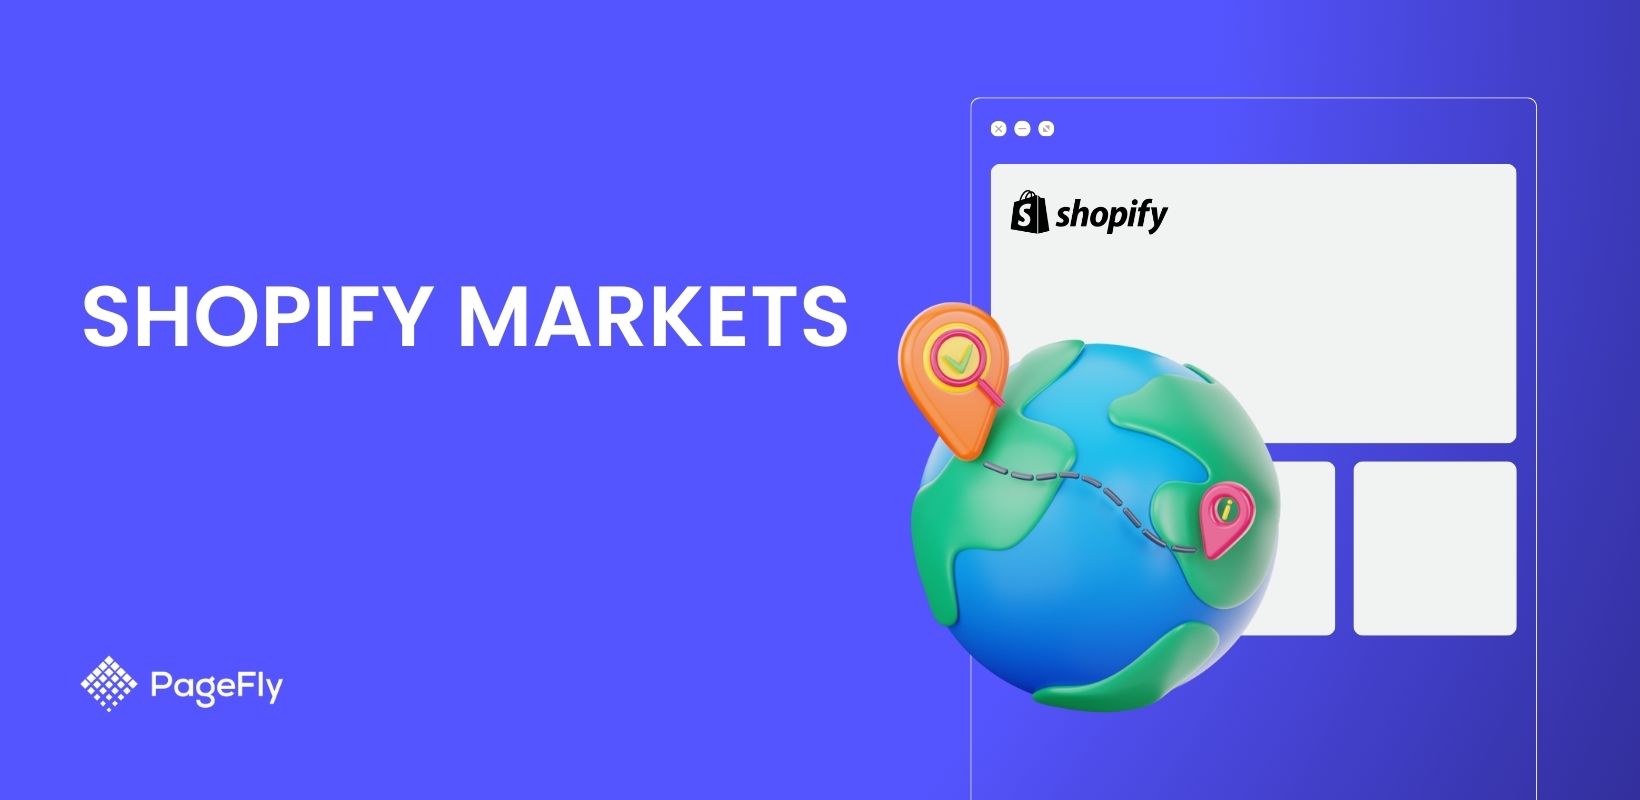 Shopify Markets: Bring Your Business To International Market